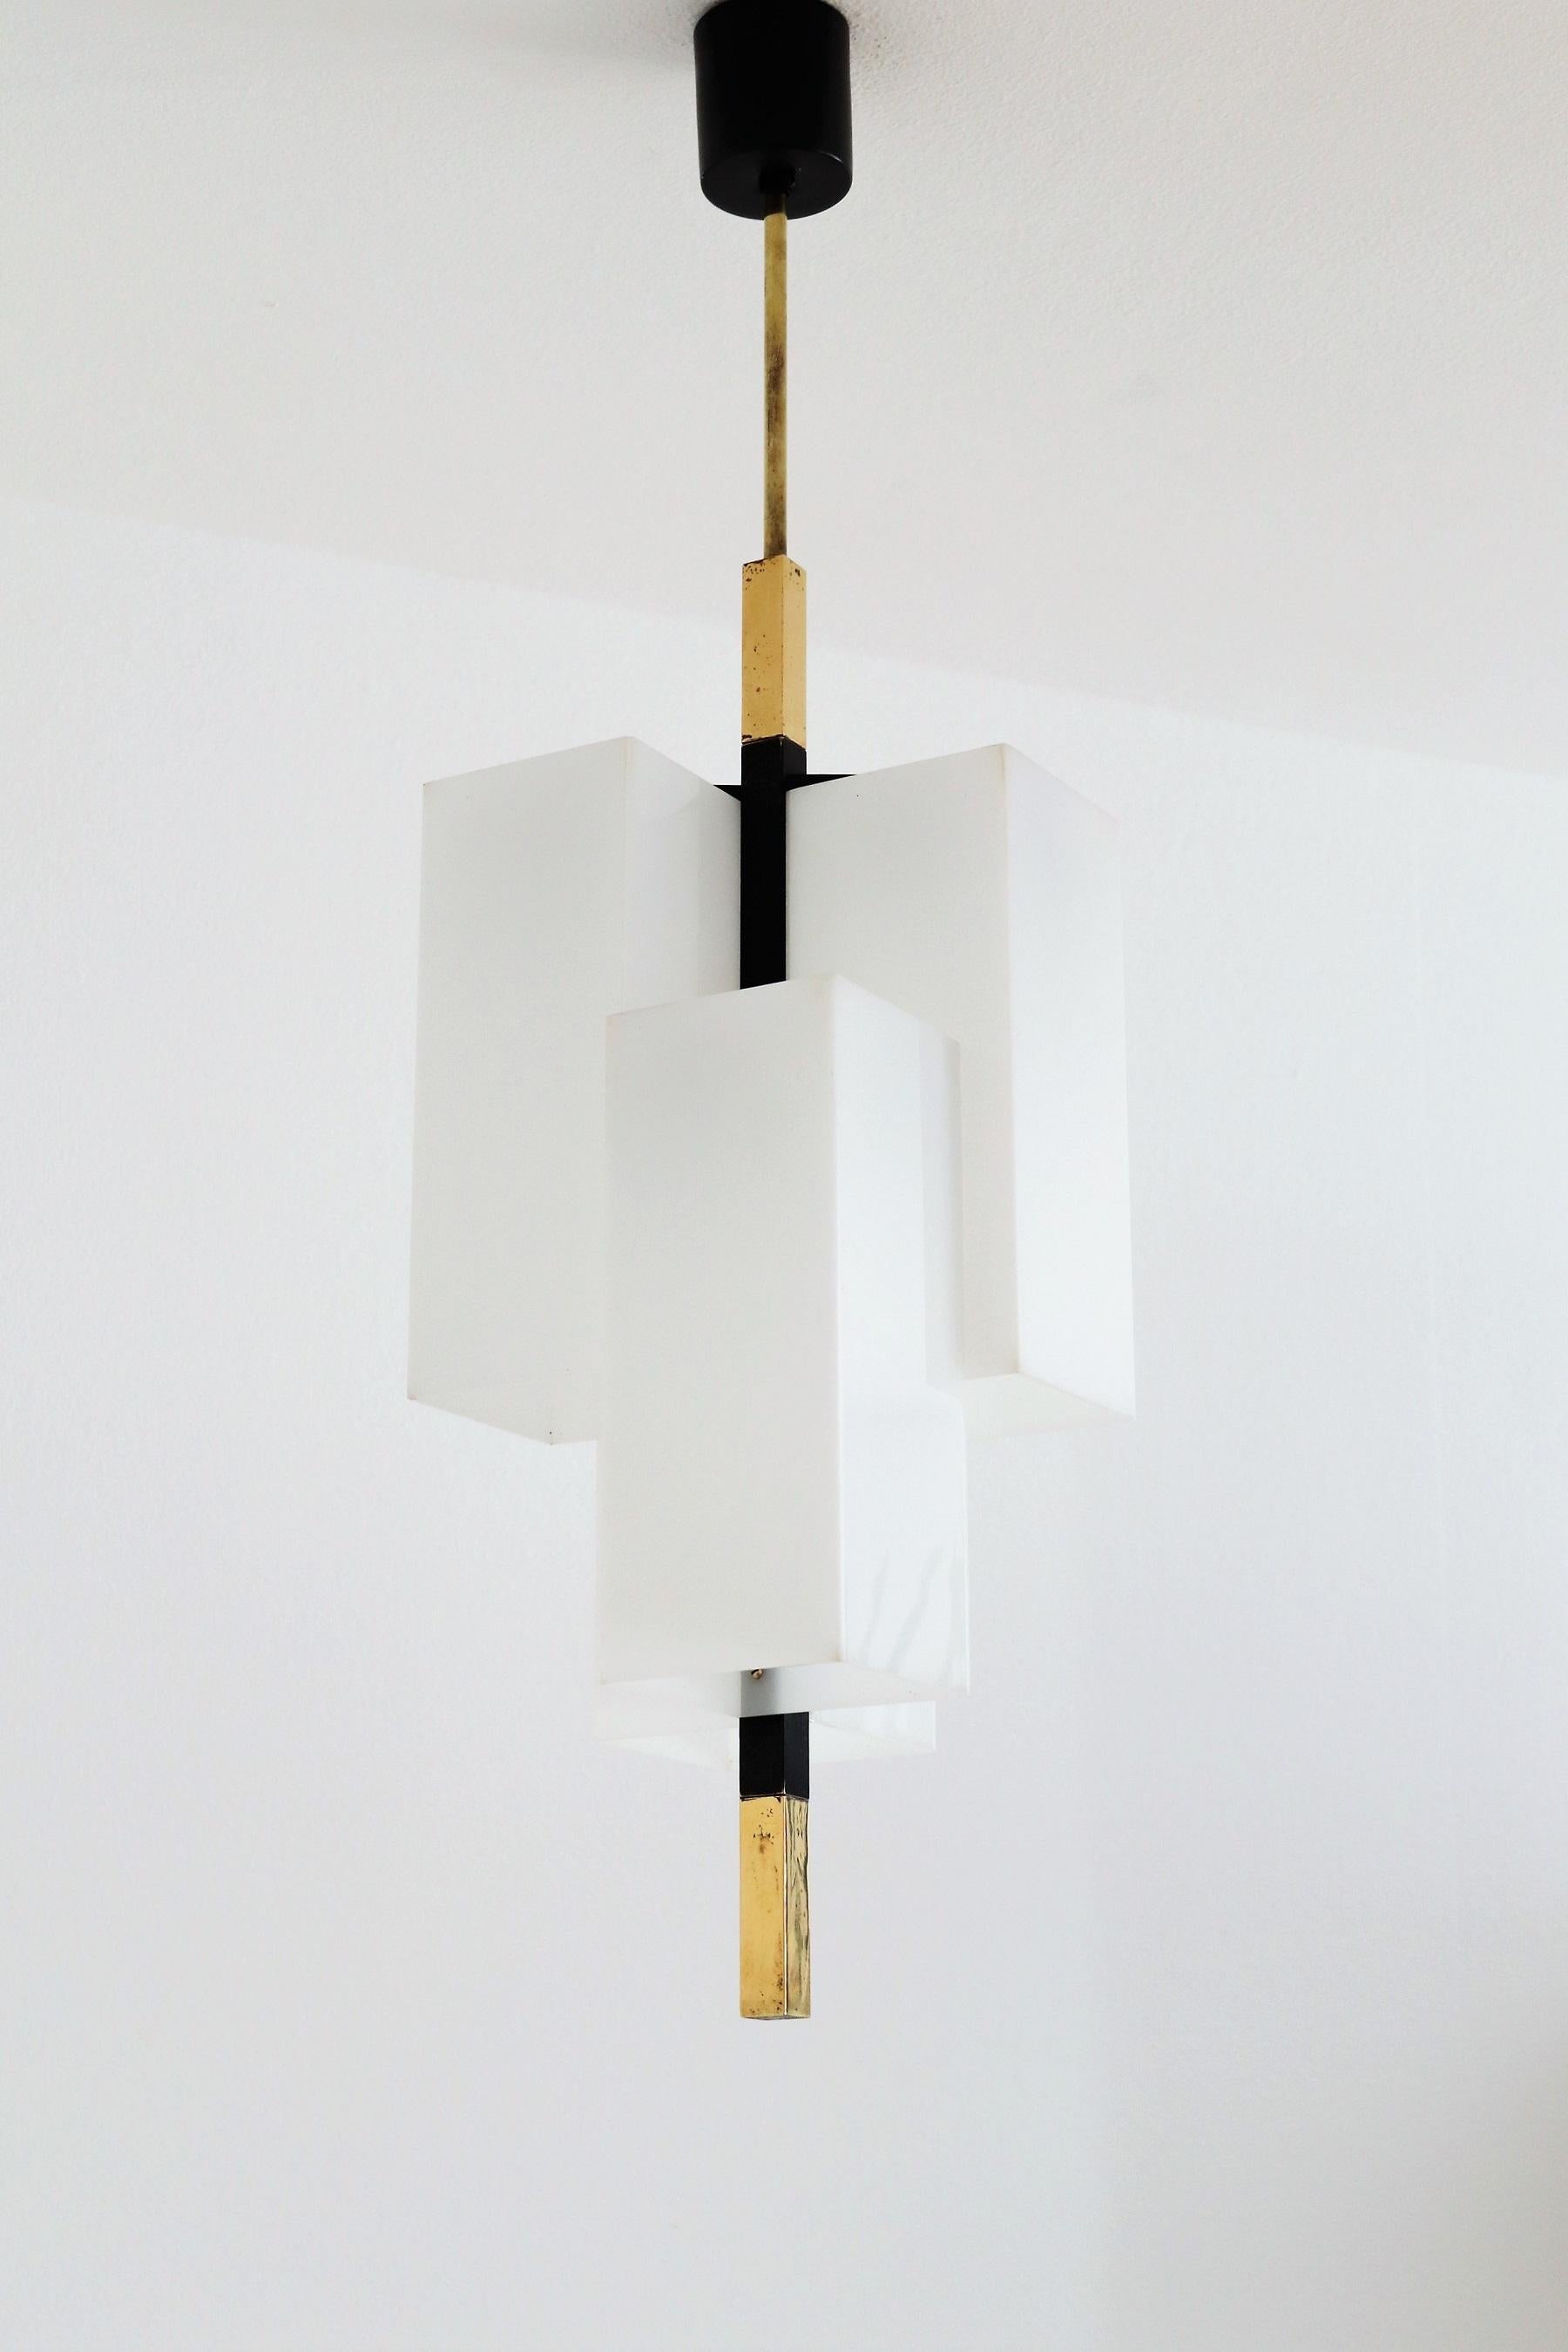 Metal Italian Modern Pendant Light in Acrylic and Brass by Stilux Milano, 1970s For Sale